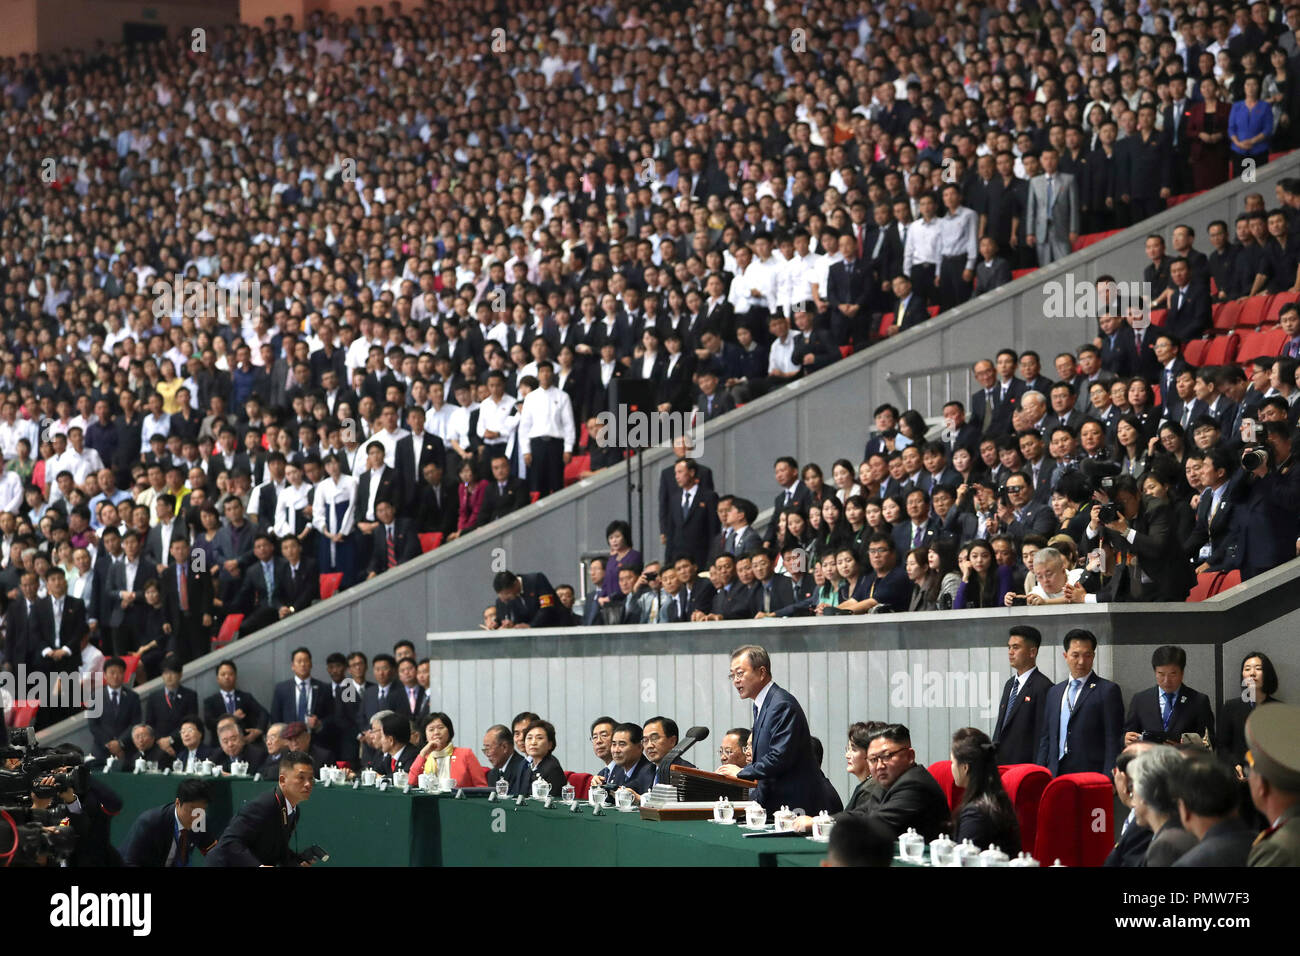 Sep 20, 2018 - Pyeongyang, North Korea - South Korean President Moon Jae-in watched a controversial mass gymnastics performance in Pyongyang late Wednesday on the second day of his trip, alongside North Korean leader Kim Jong-un. As the two leaders entered the May Day Stadium, the venue of the performance, together at about 9 p.m, some 150,000 Pyongyang citizens cheered and gave them an emotional standing ovation. The cheers became louder when Moon waved his hands toward the crowd. (Credit Image: © Pool/Pyongyang Press Corps via ZUMA Wire) Stock Photo